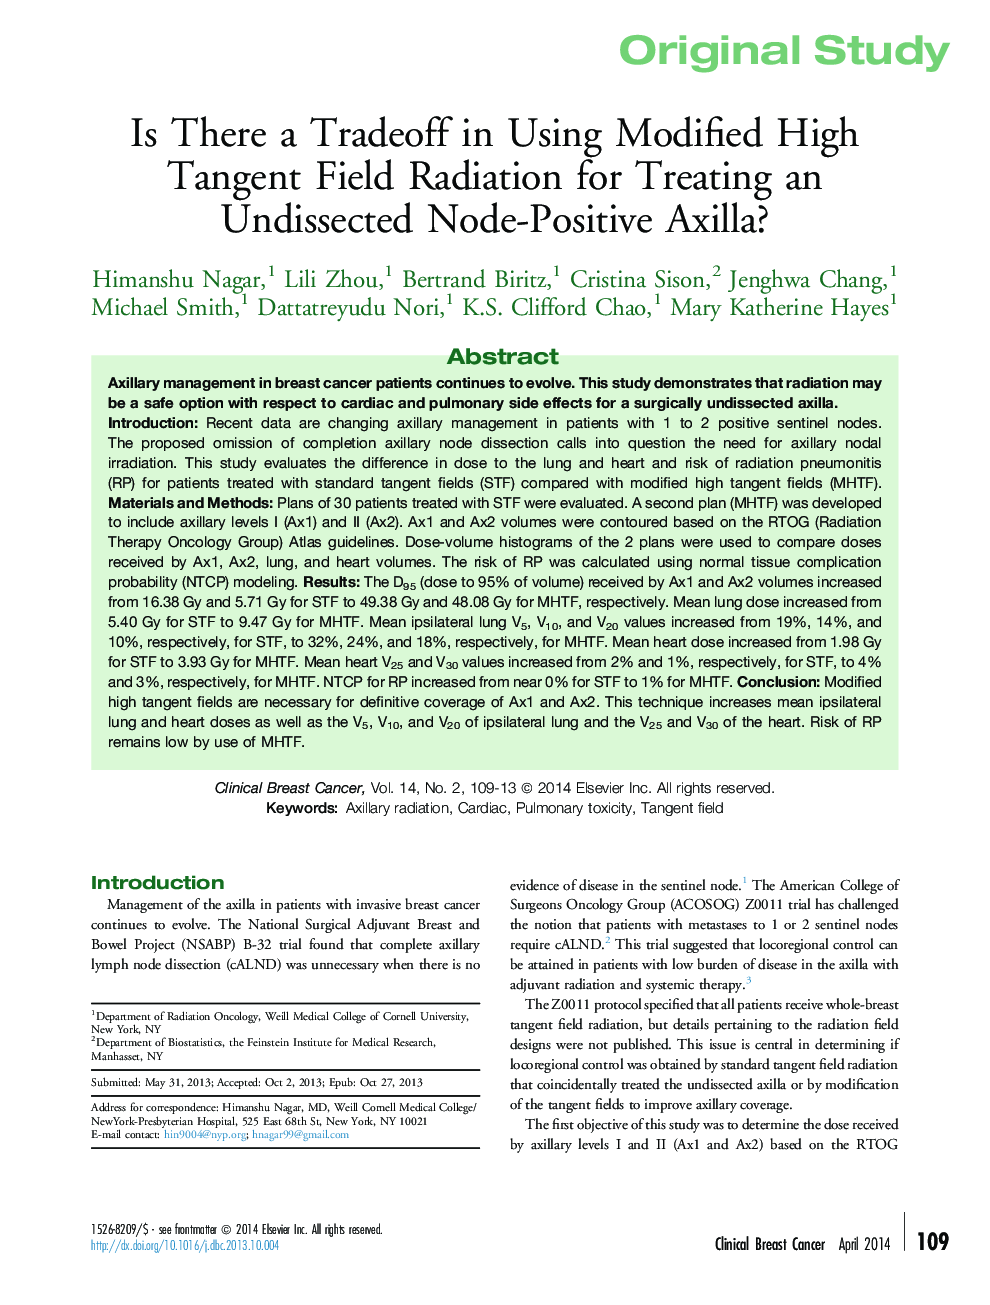 Is There a Tradeoff in Using Modified High Tangent Field Radiation for Treating an Undissected Node-Positive Axilla?